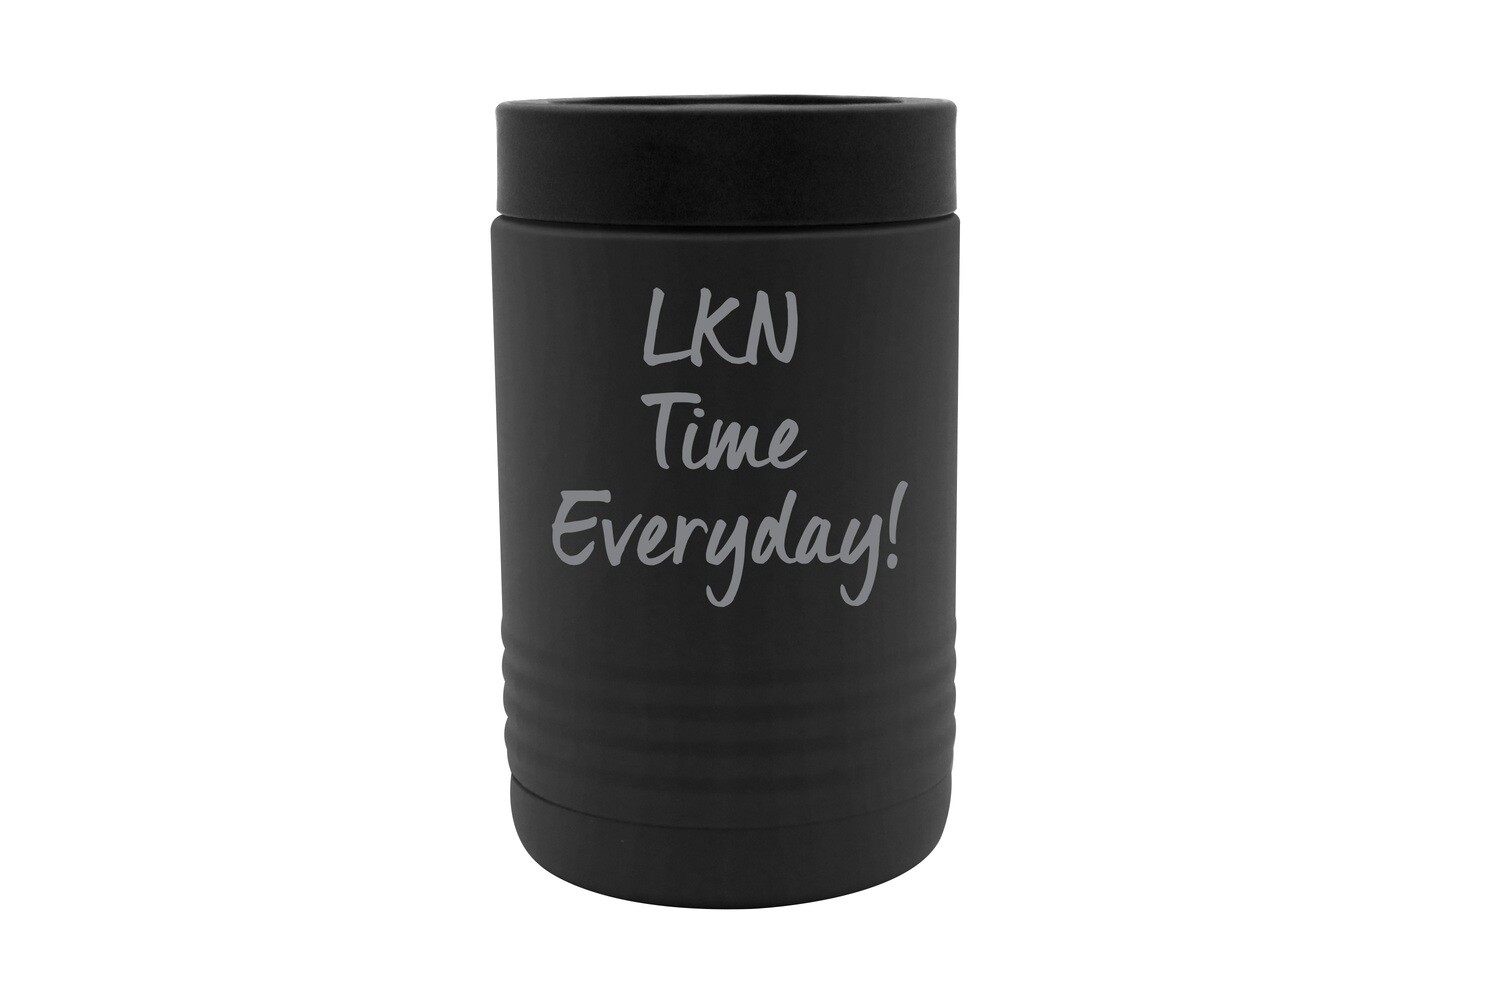 Customized Location "LKN" Time Everyday Insulated Beverage Holder